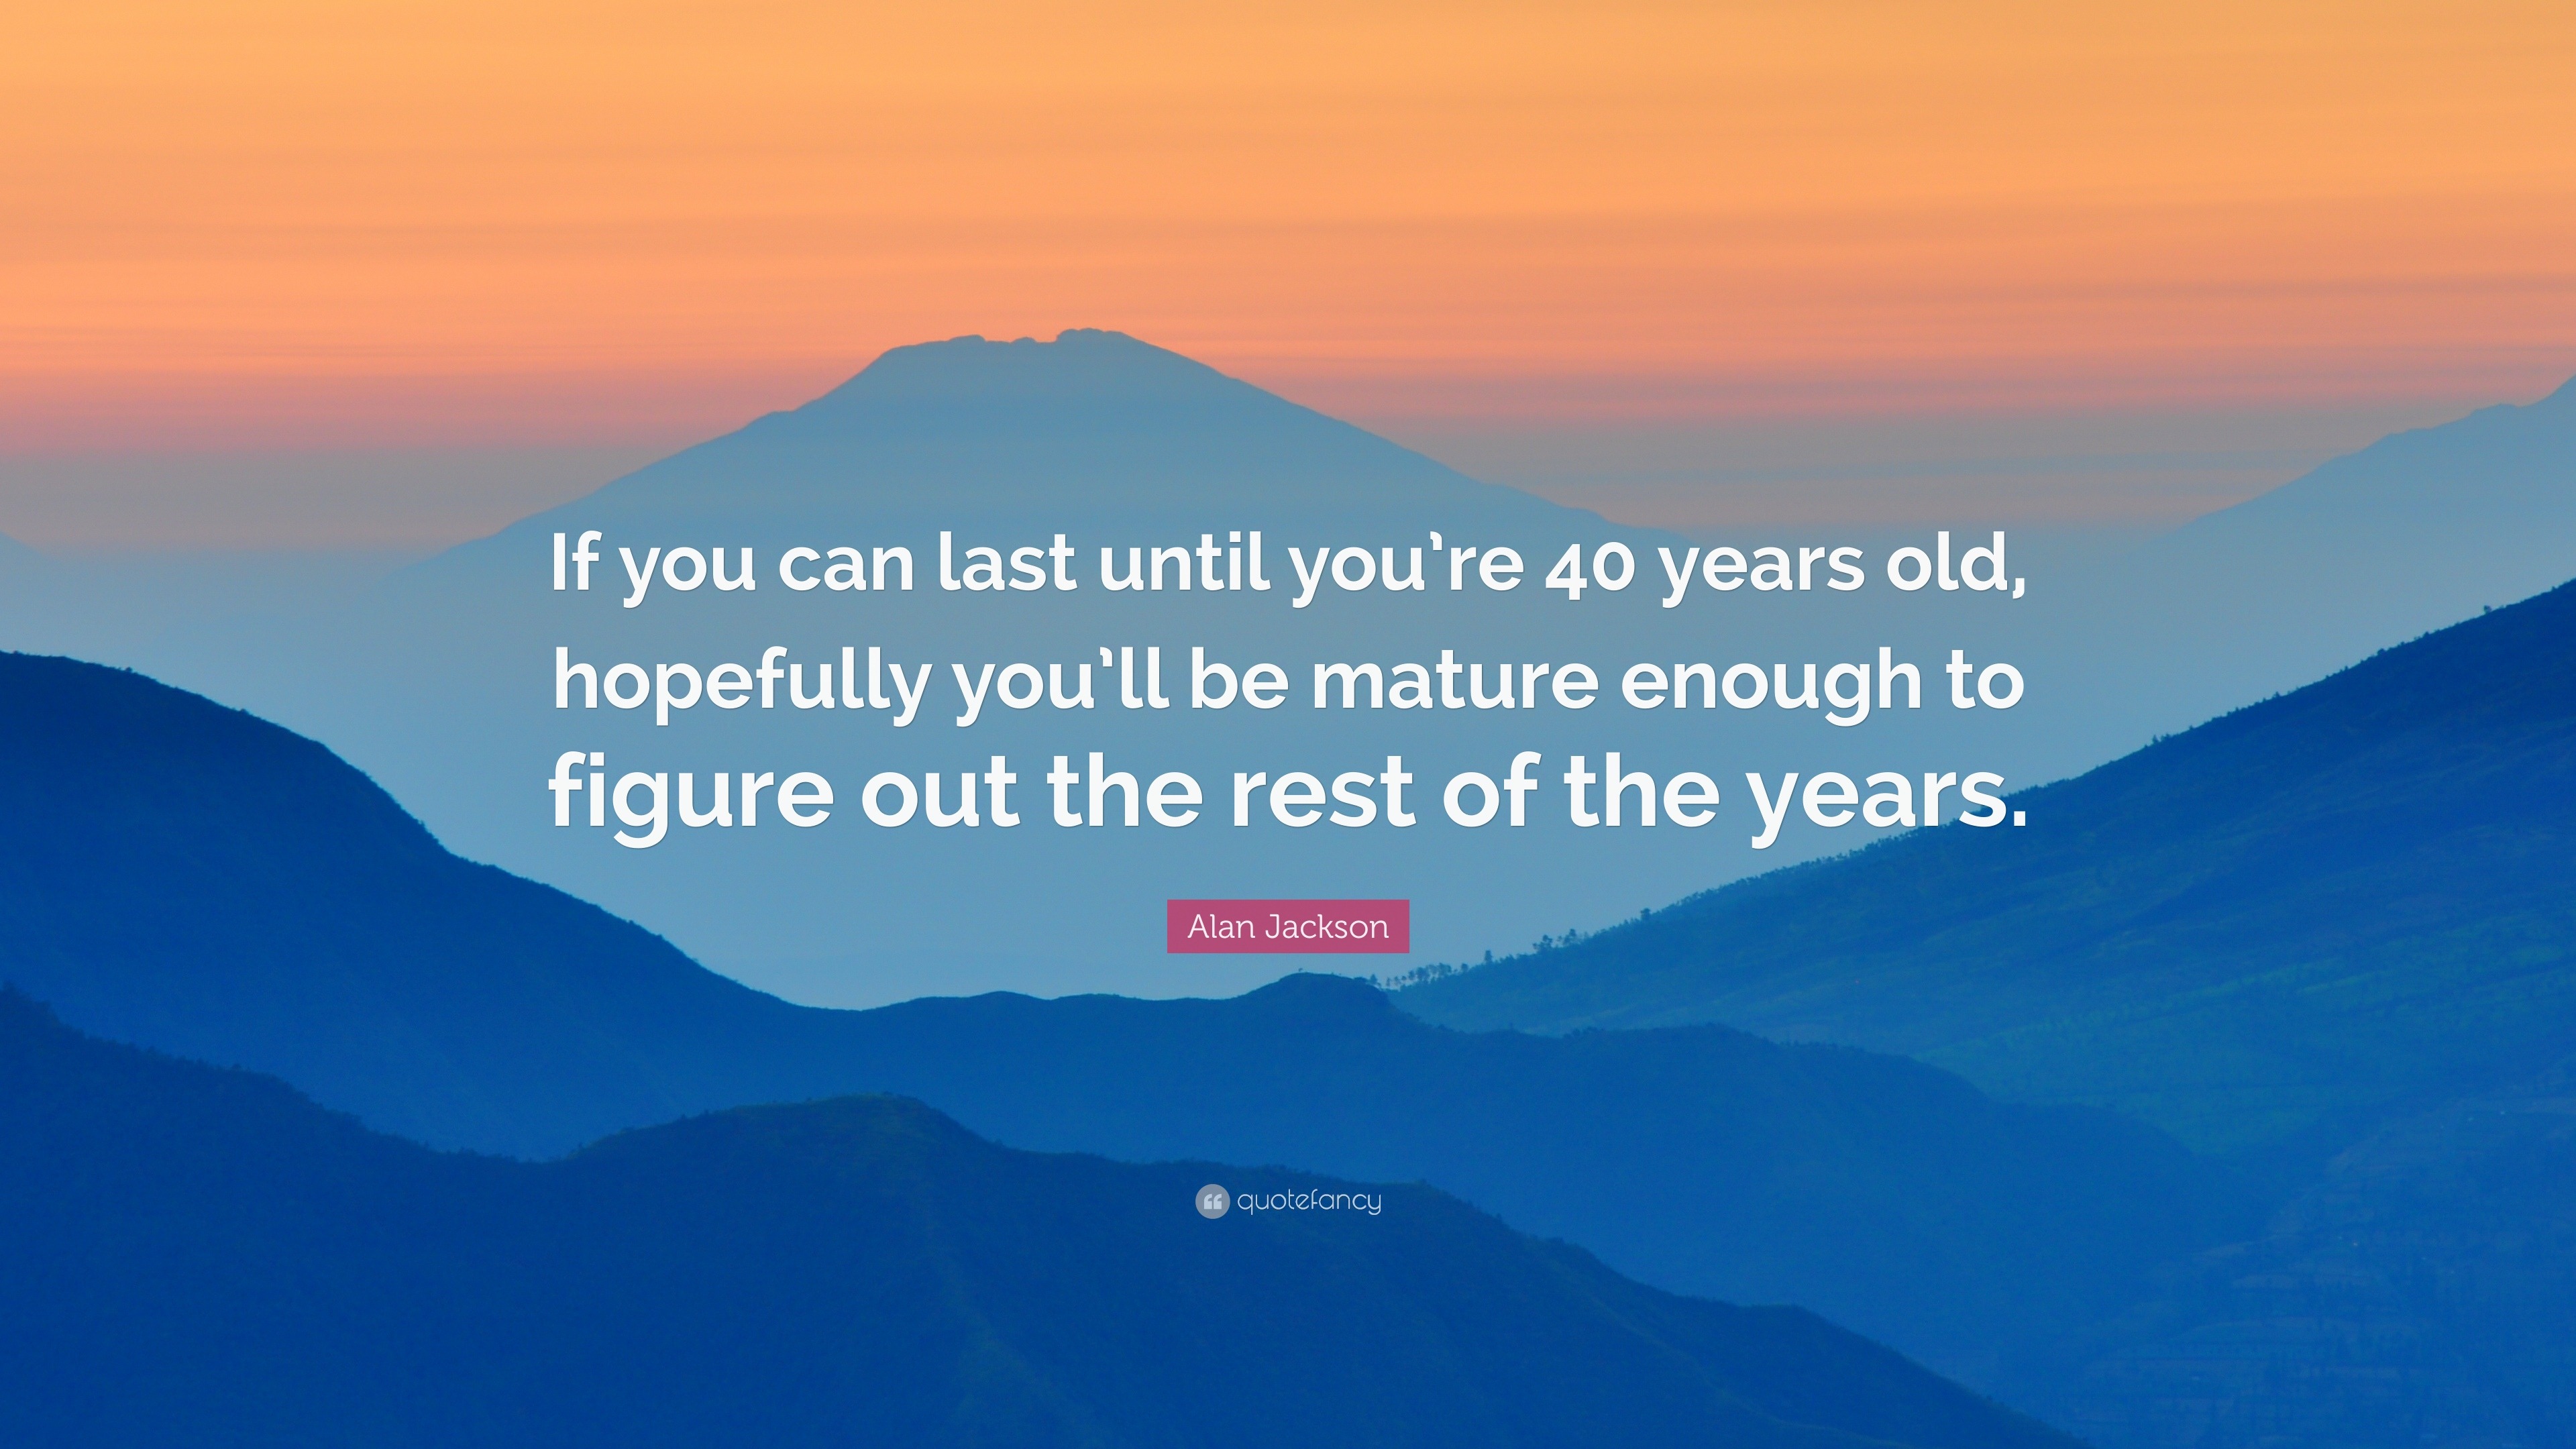 Alan Jackson Quote: “If you can last until you’re 40 years old ...